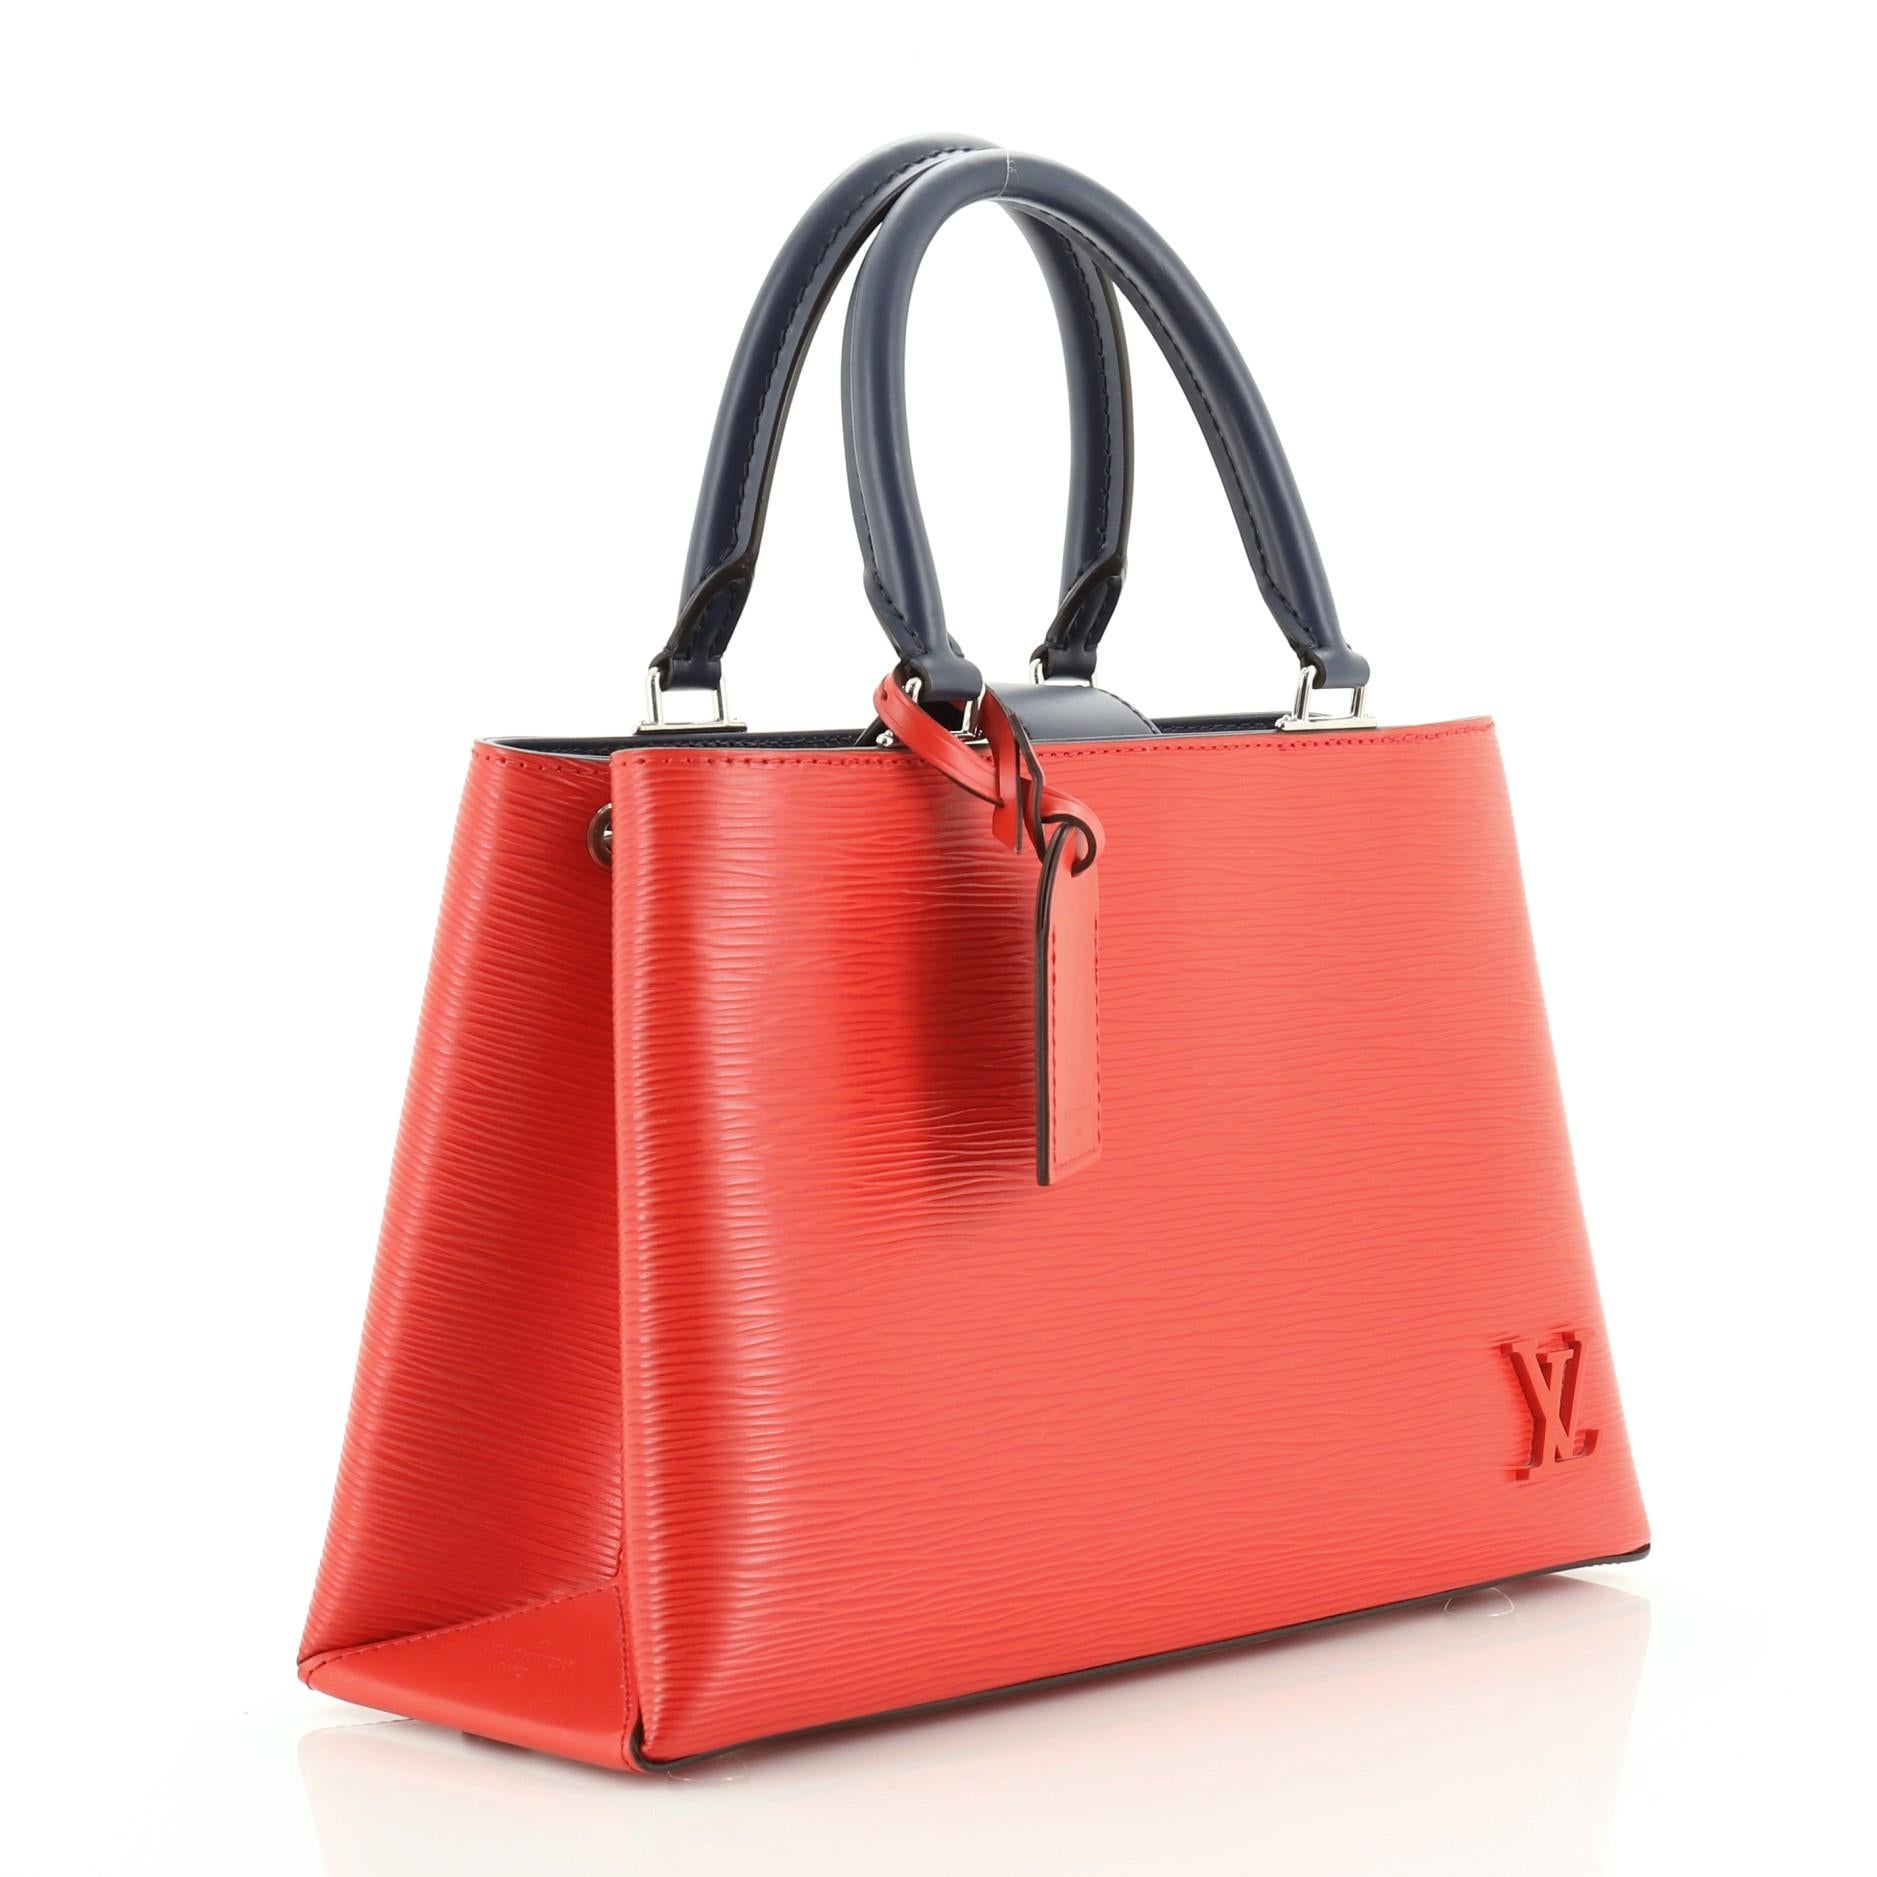 This Louis Vuitton Kleber Handbag Epi Leather PM, crafted in blue and red epi leather, features dual rolled handles, exterior back pocket, and silver-tone hardware. Its magnetic snap closure opens to a blue microfiber interior divided into two